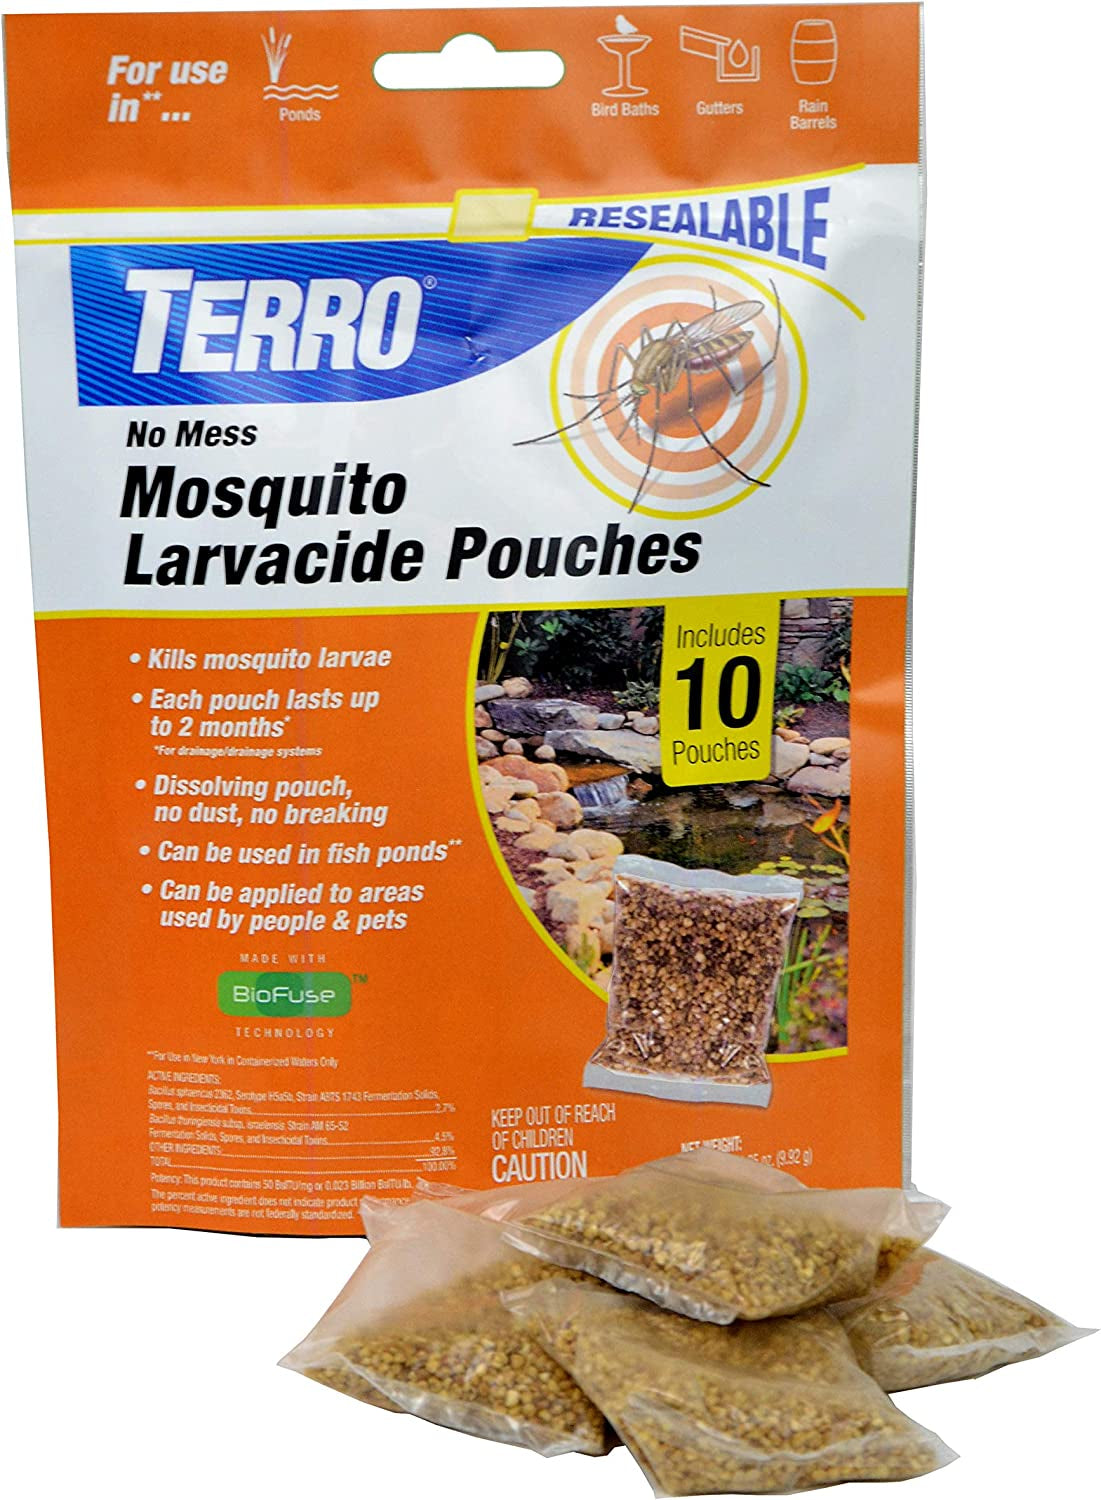 Terro T1210 No Mess Mosquito Larvacide Pouches - 10 Pouches Included